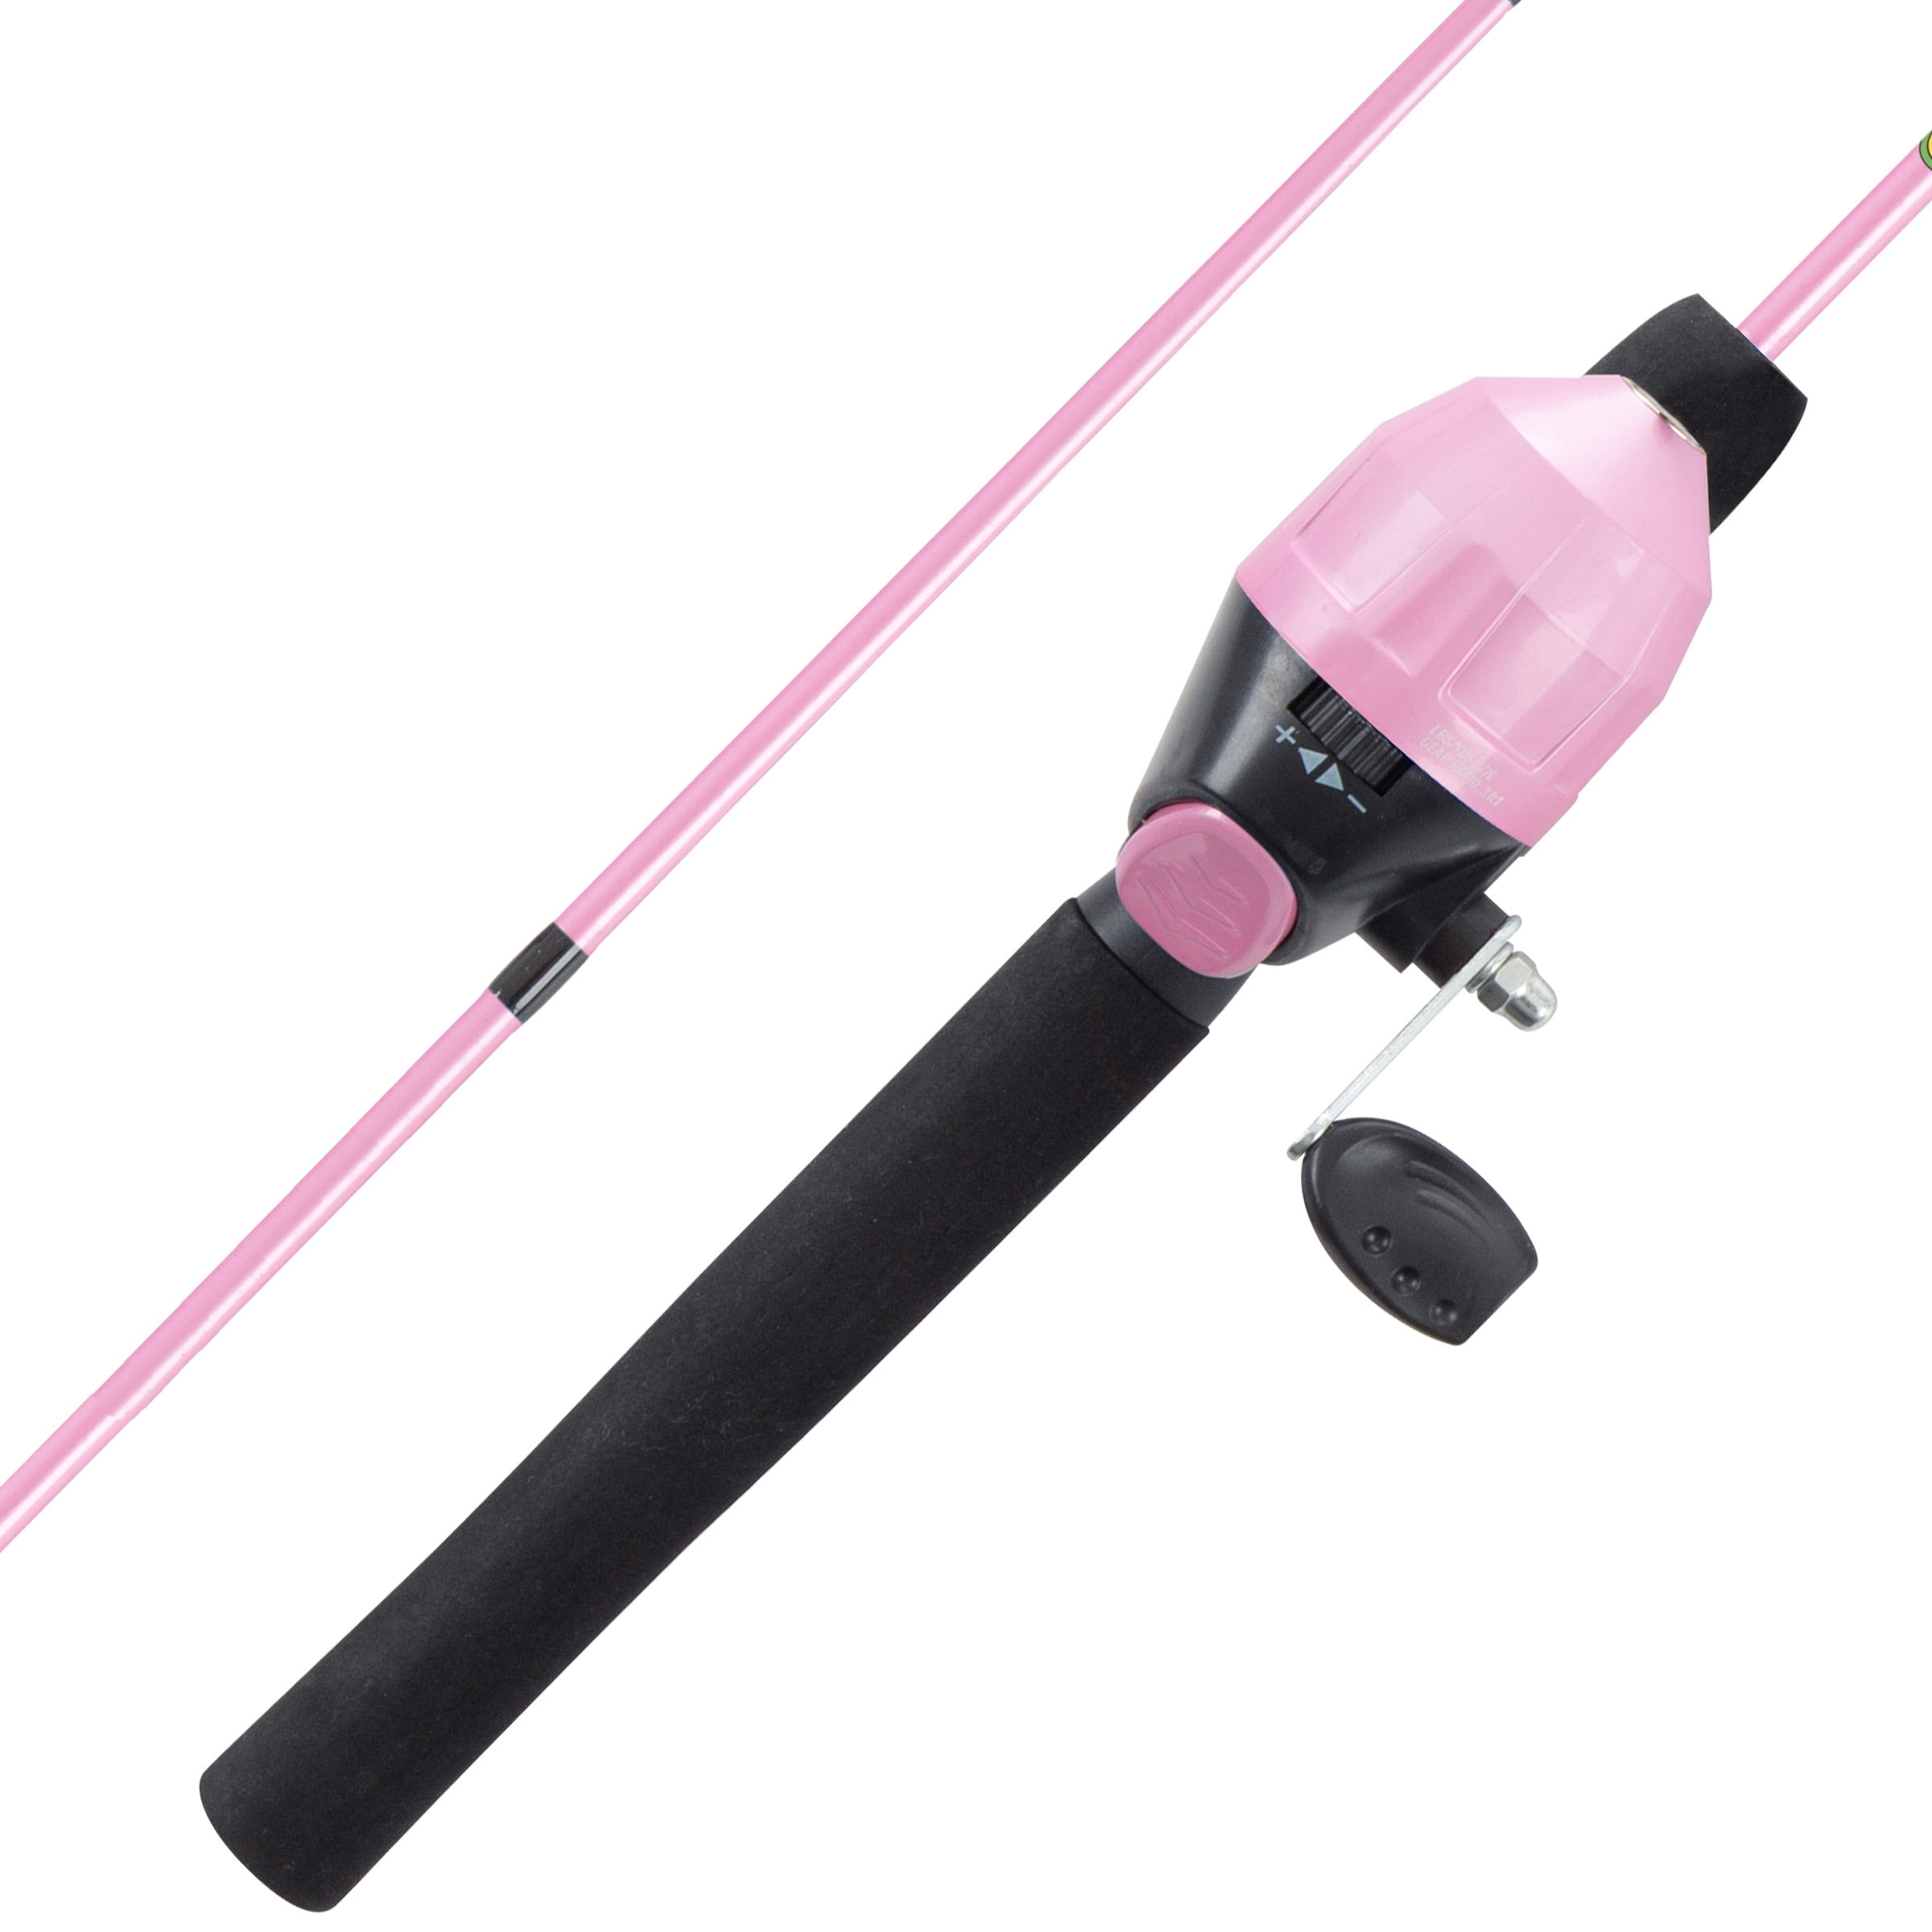 Lanaak Pink Kids Fishing Pole and Tackle Box - Fishing Rod with Reel, Net,  Travel Bag, and Beginner's Guide - Kids Fishing Kit (Pink), Rod & Reel  Combos -  Canada